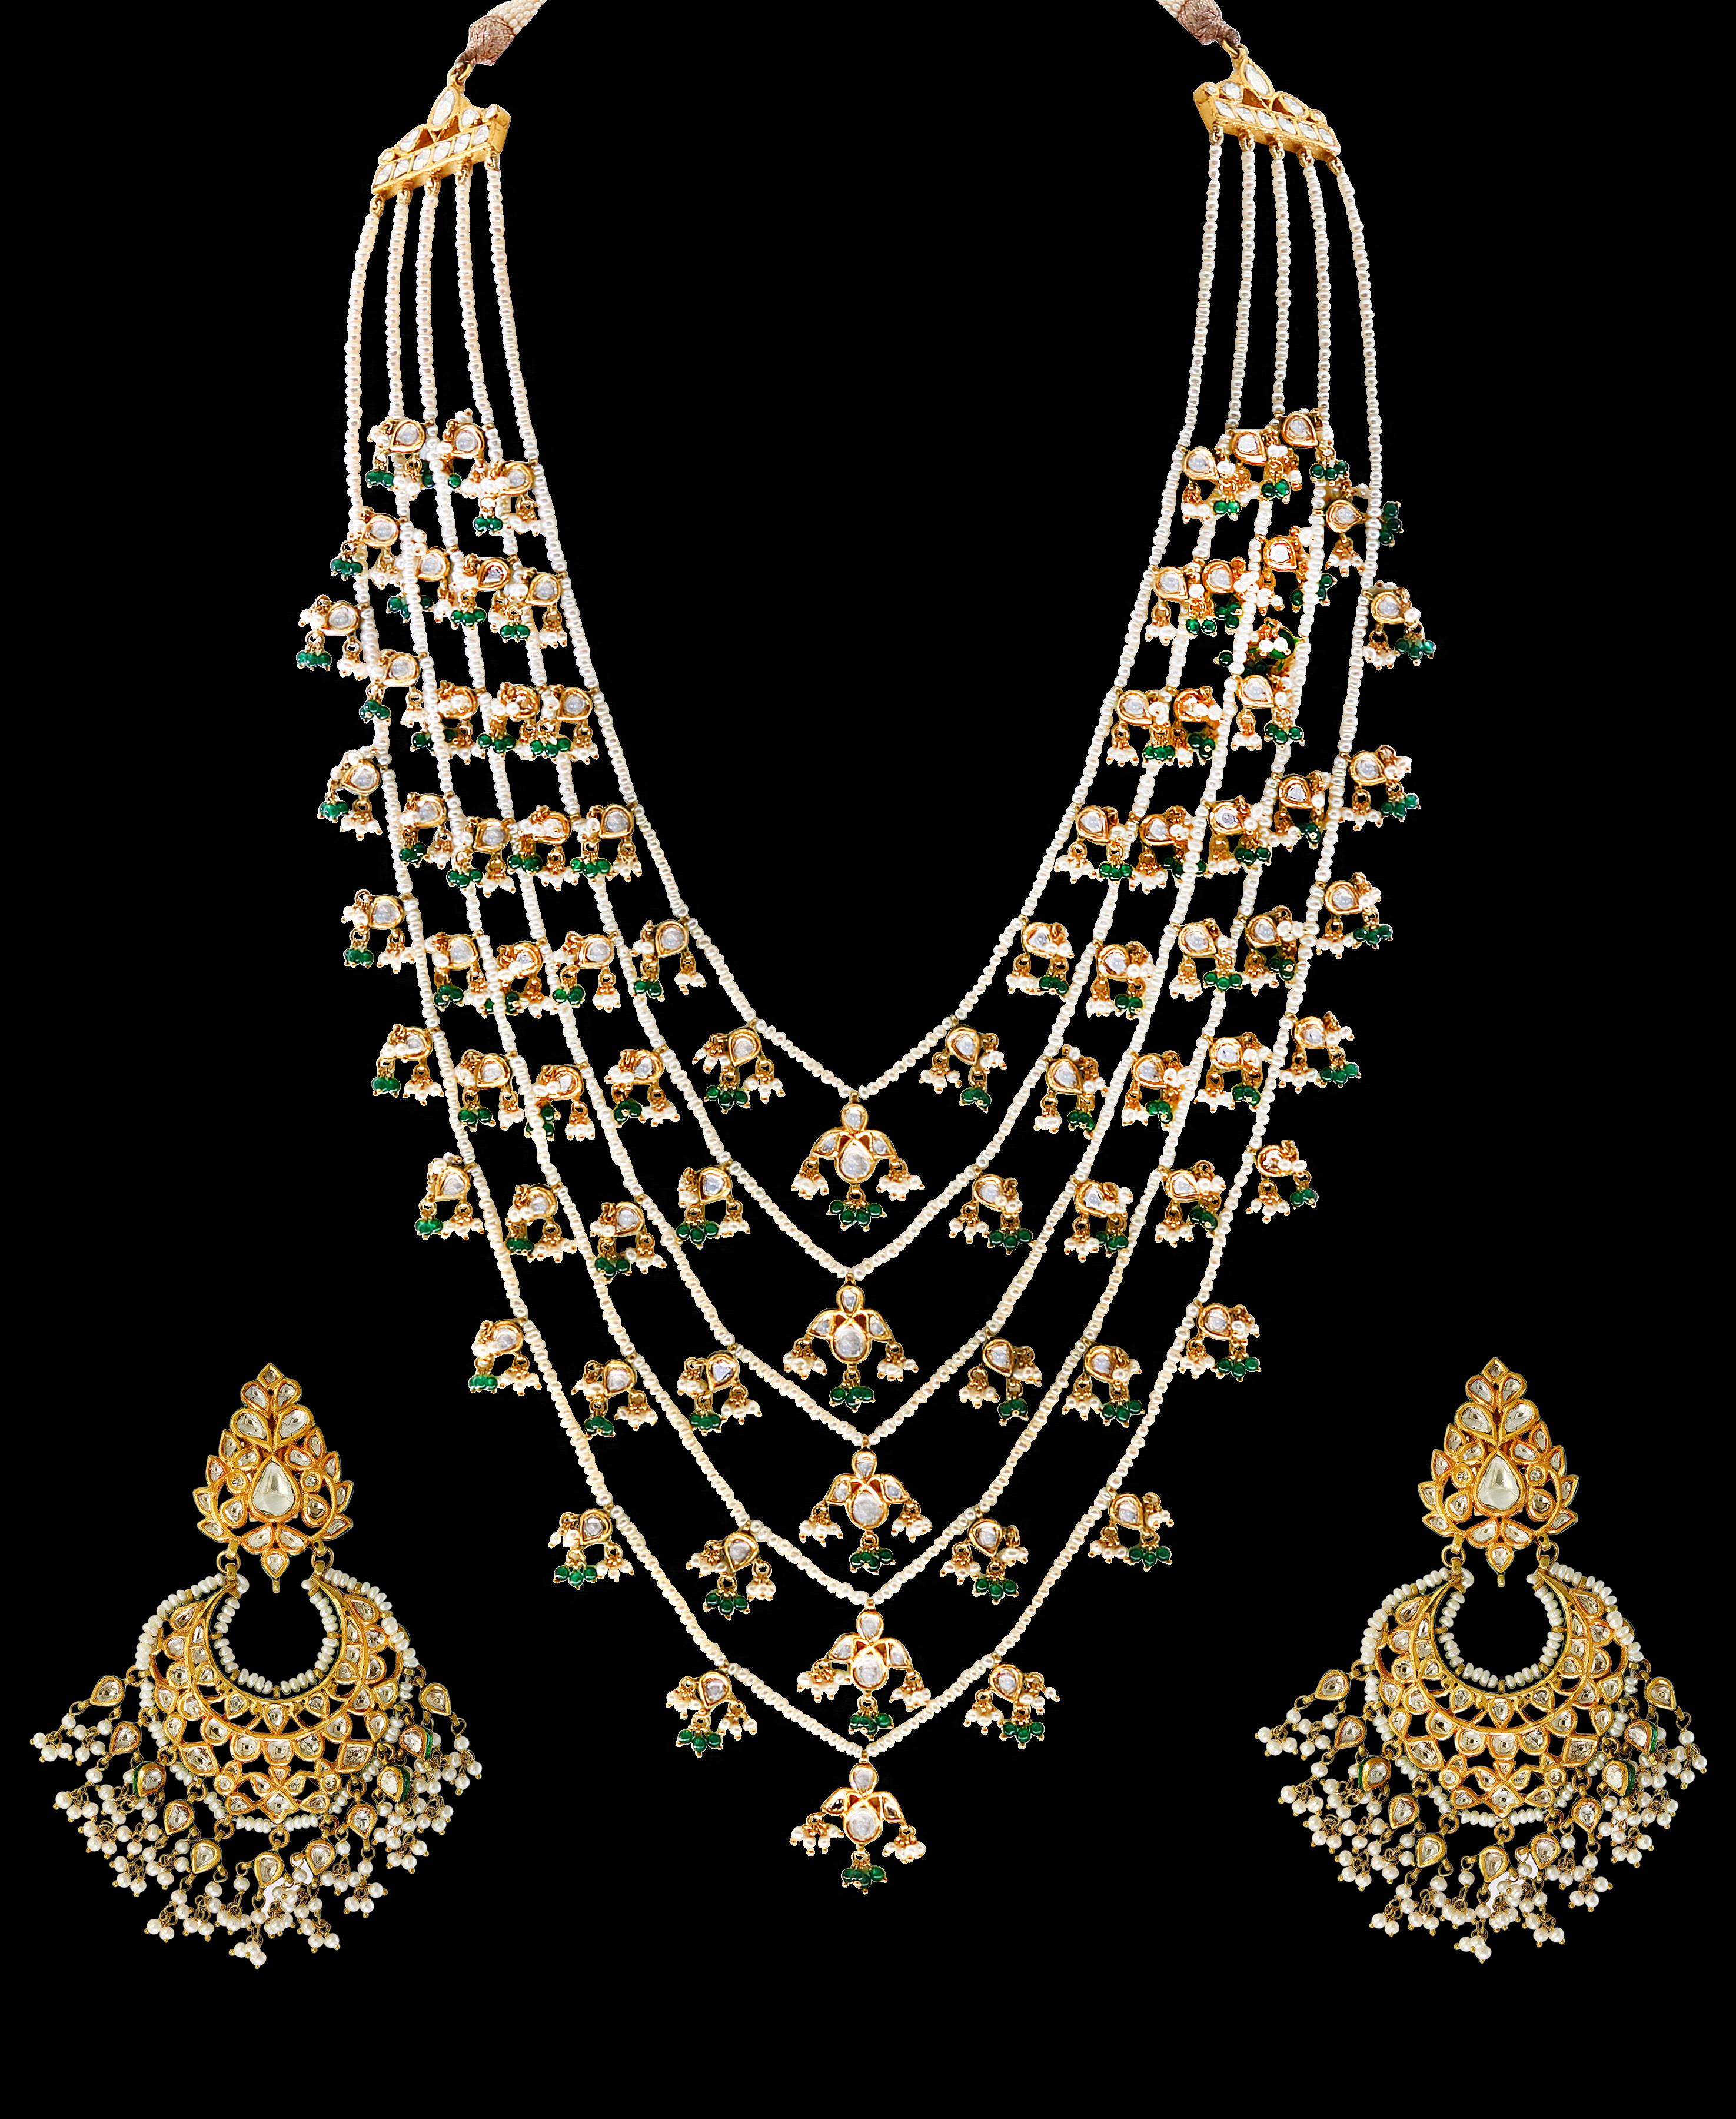 Maharajas & Mughal Magnificenct multi layer Necklace and Heavy Antique Gold Chand Bali Earrings
Jadau Traditional Kundan 5 layer Polki Rose Cut Diamond 18 K Y G Bridal Necklace and Chandelier earrings 
Multi Layer amazingly beautiful beyond